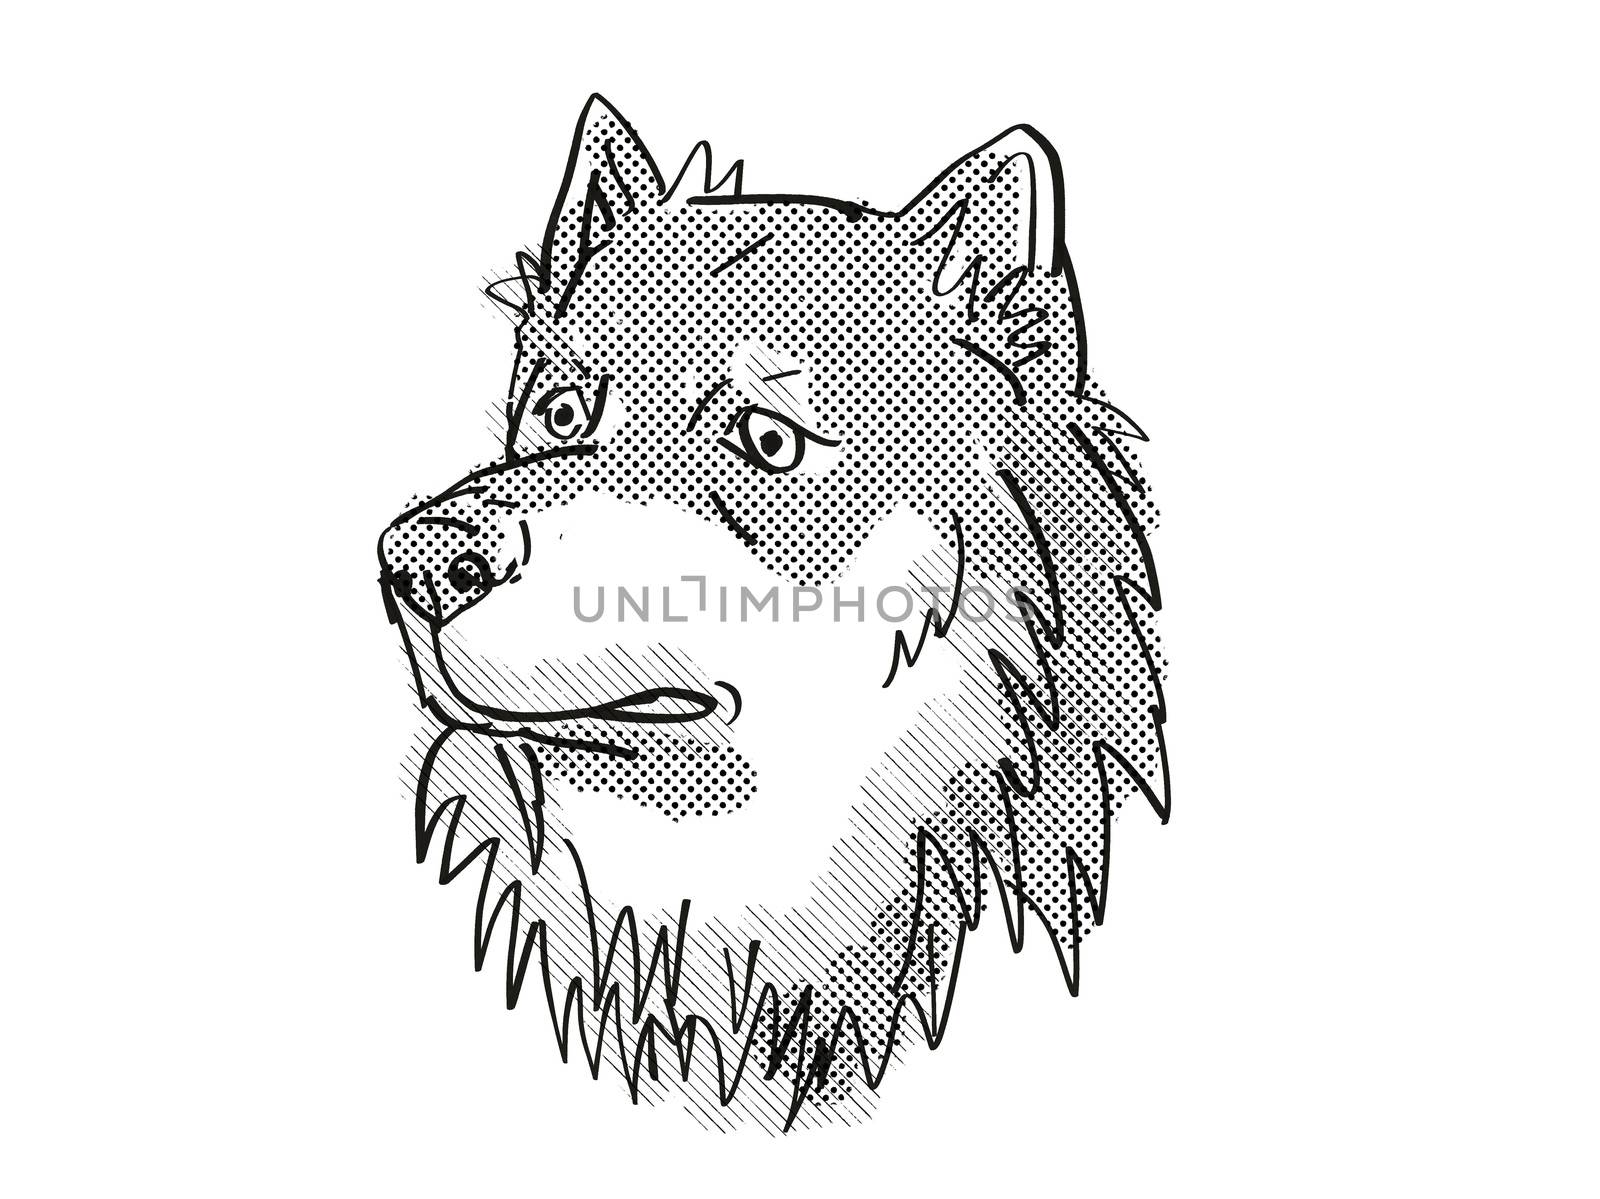 Retro cartoon style drawing of head of a Finnish Lapphund, a domestic dog or canine breed on isolated white background done in black and white.